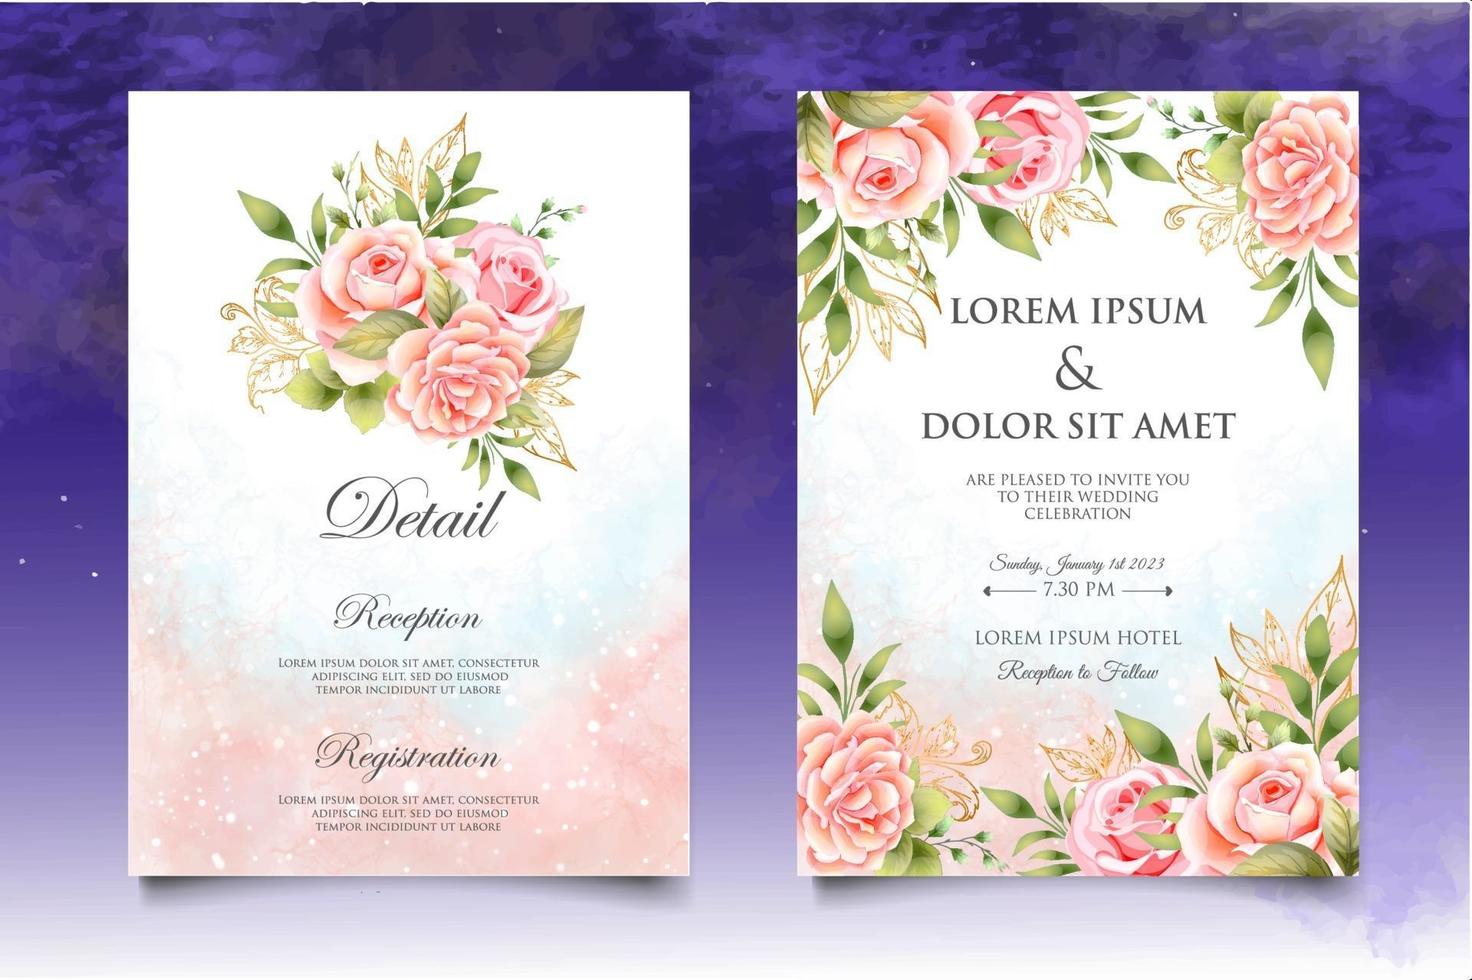 Beautiful Hand Drawing Floral Wedding Invitation Template vector